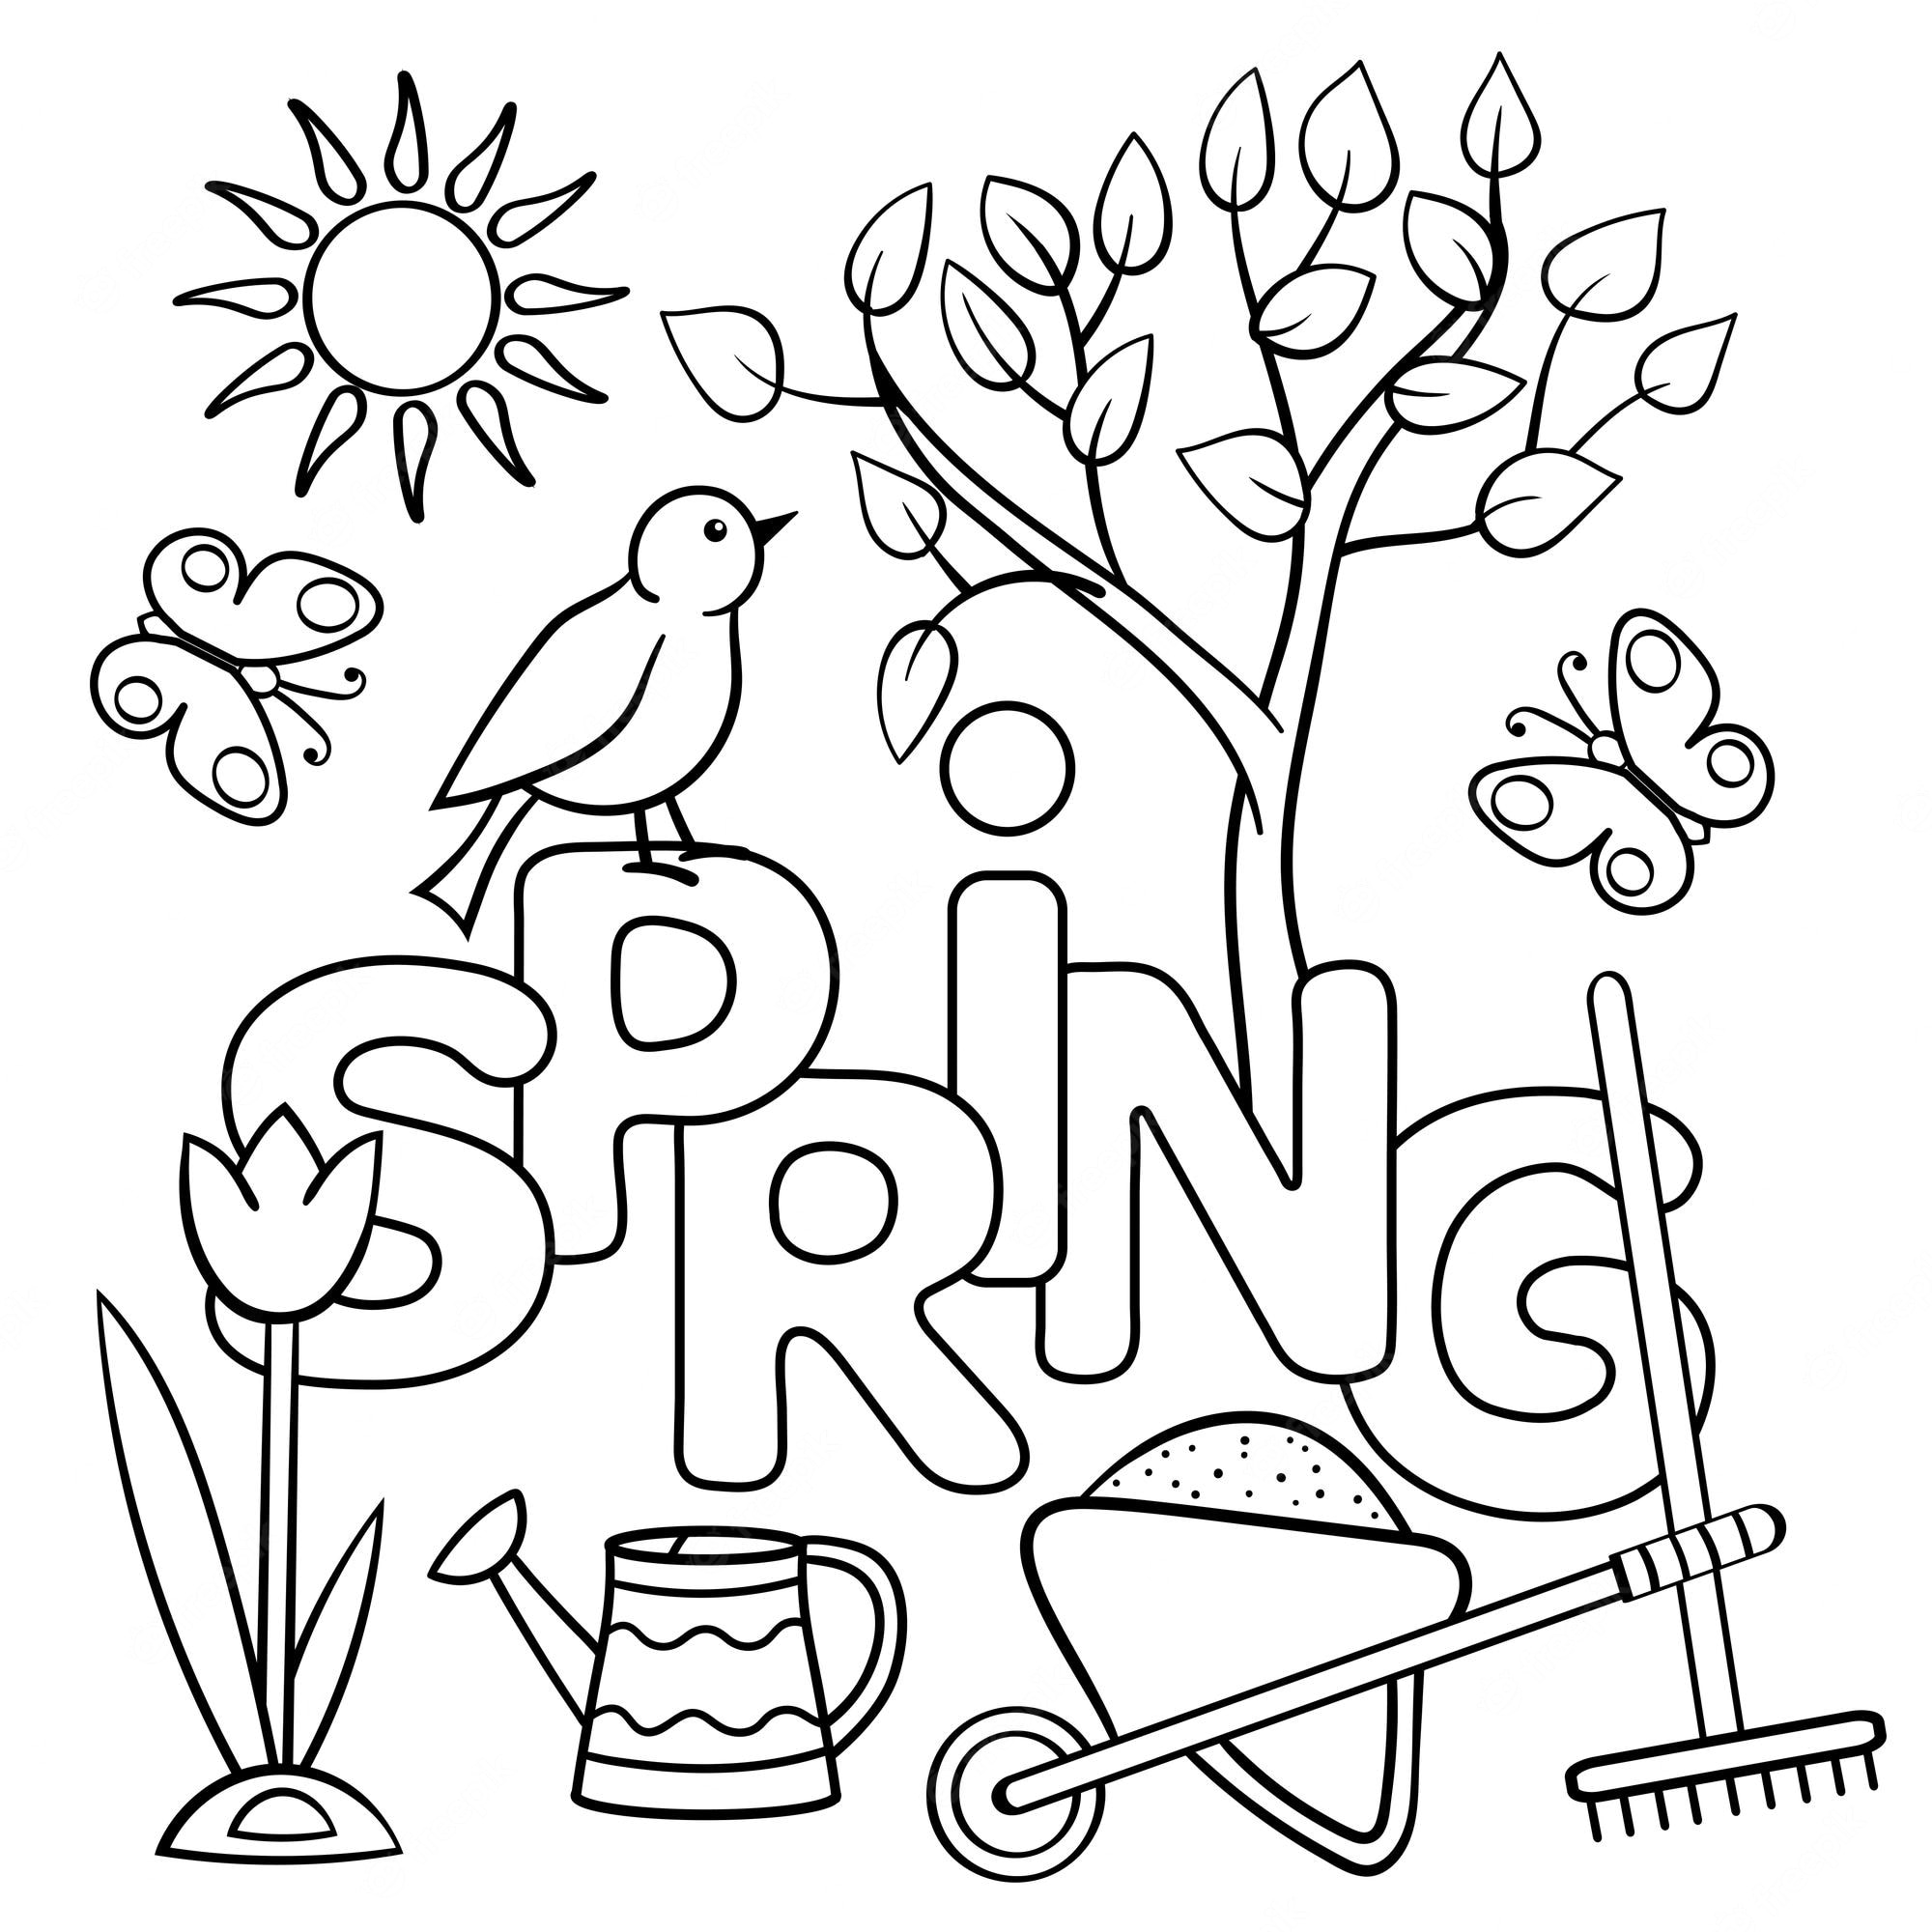 Premium Vector | Coloring page with the word spring